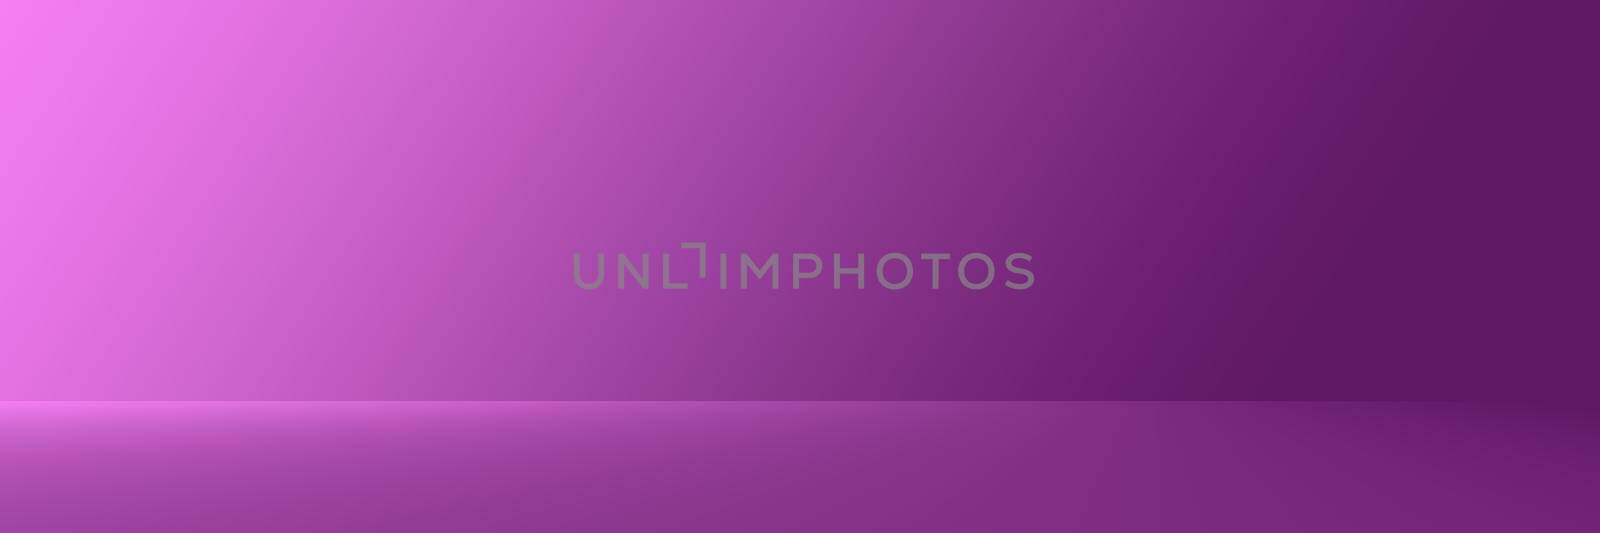 Studio Background - Abstract Bright luxury purple Gradient horizontal studio room wall background for display product ad website template